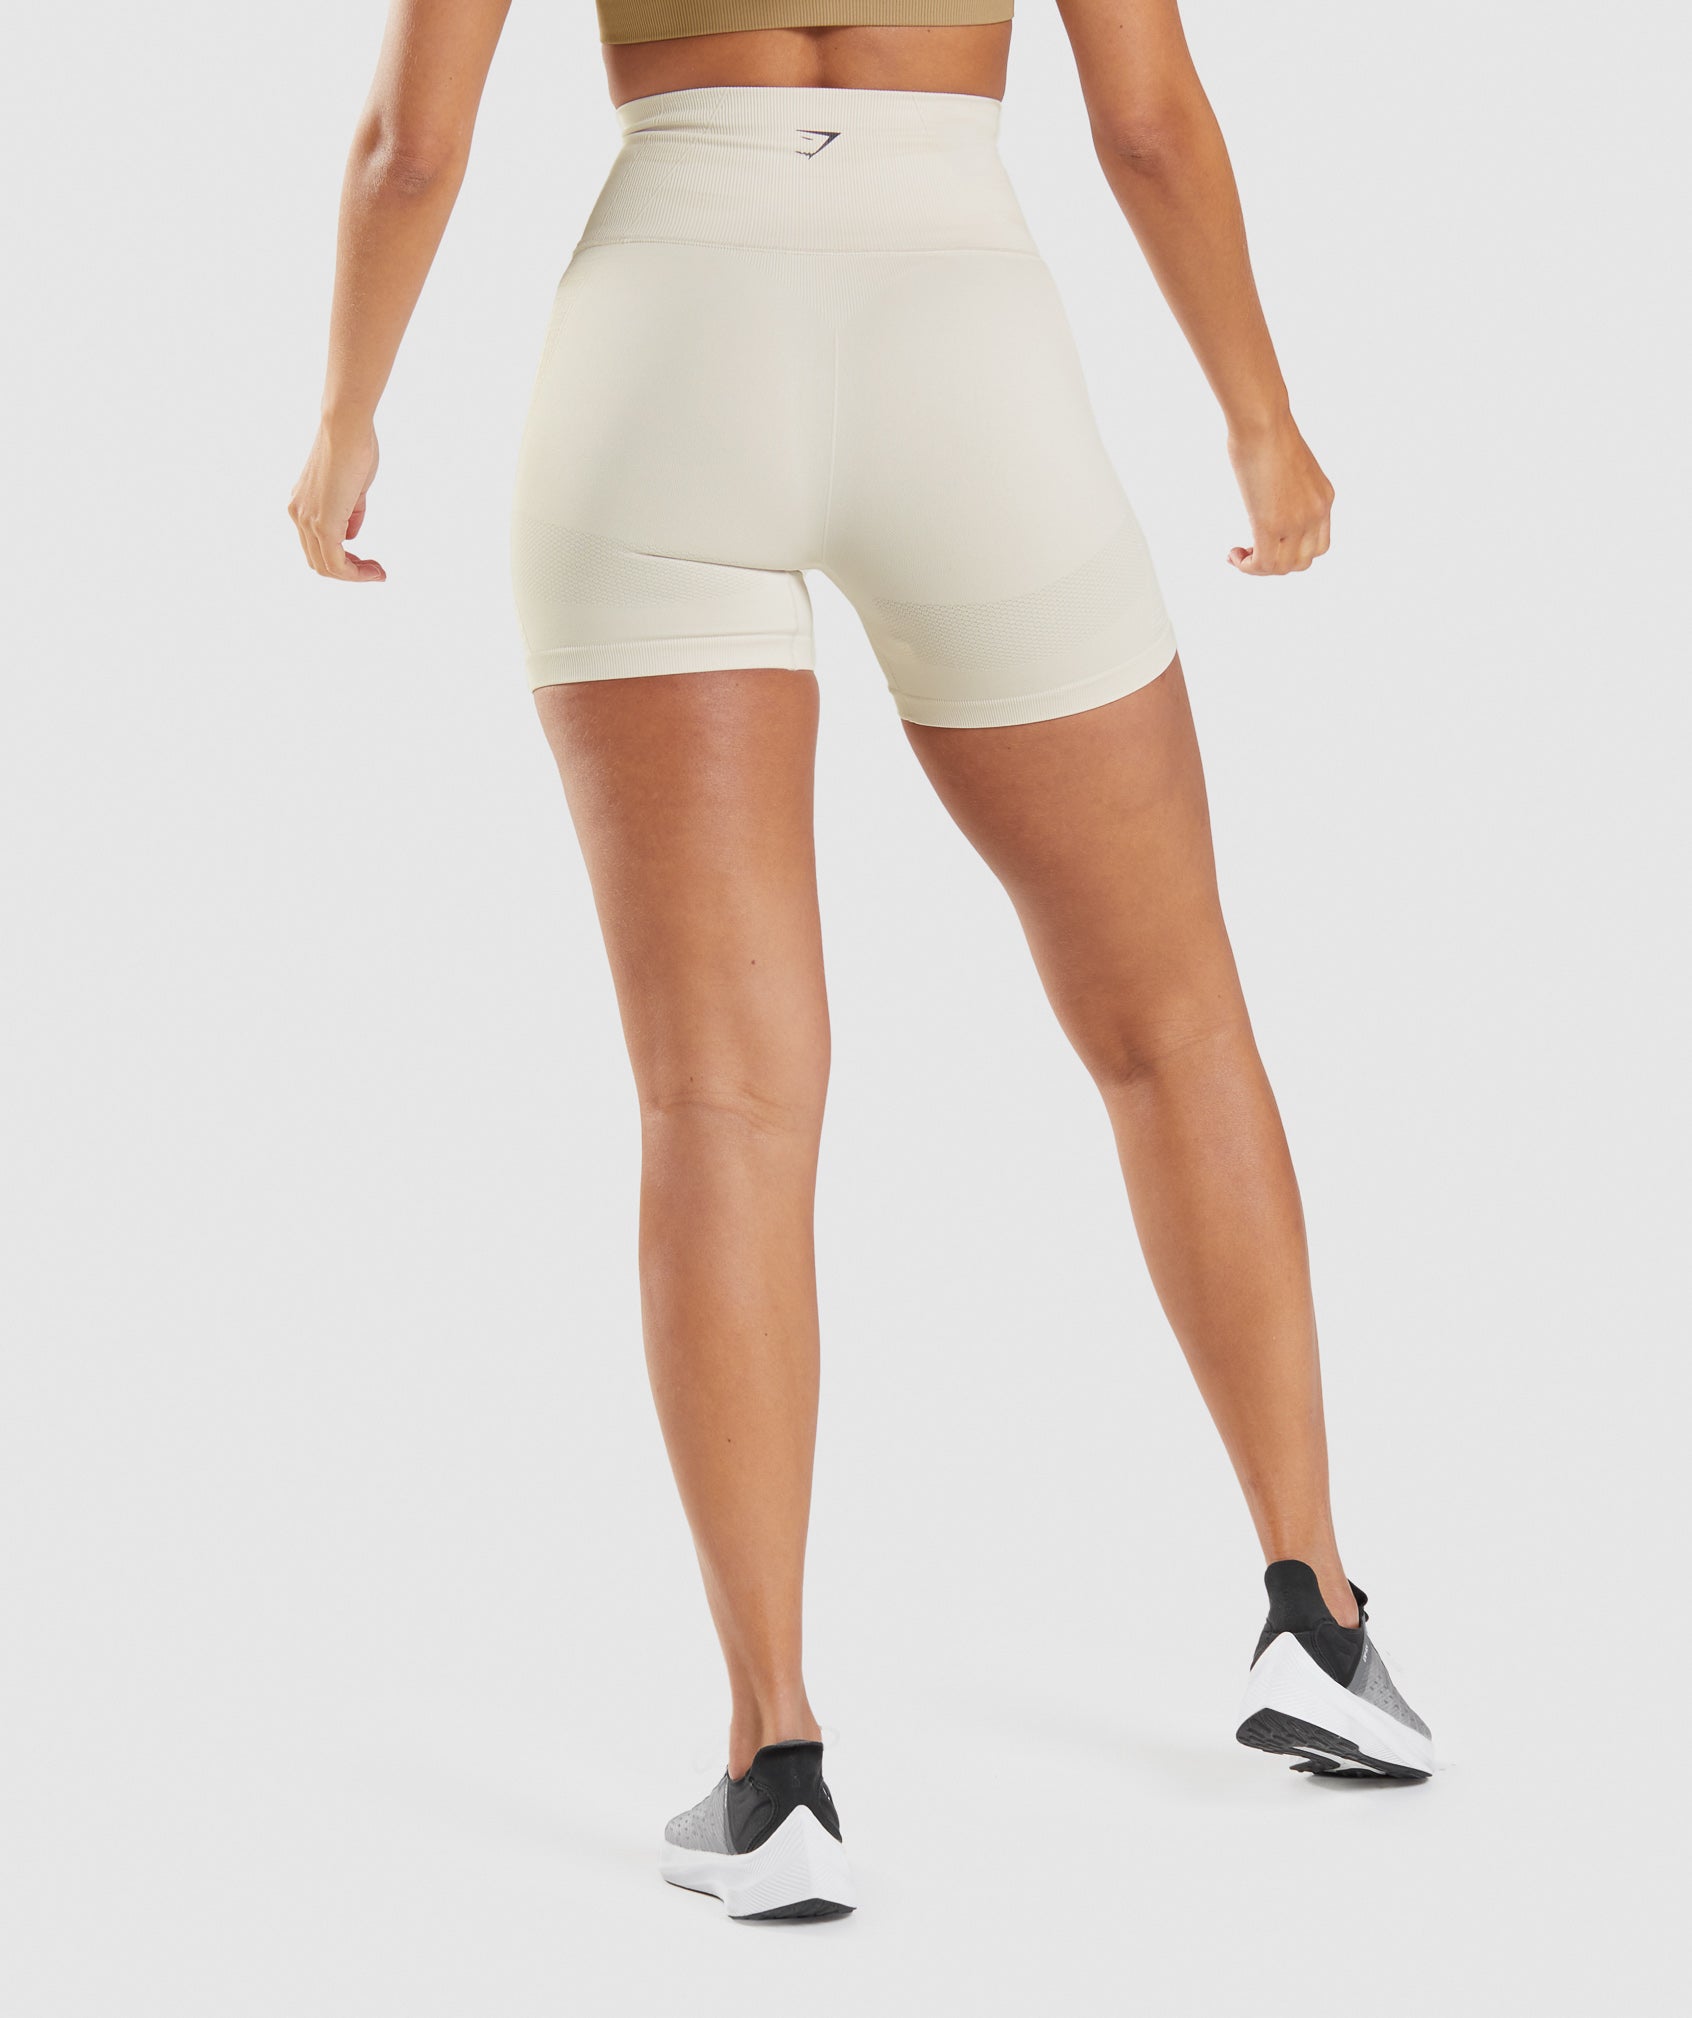 Energy Seamless Shorts in Coconut White - view 2